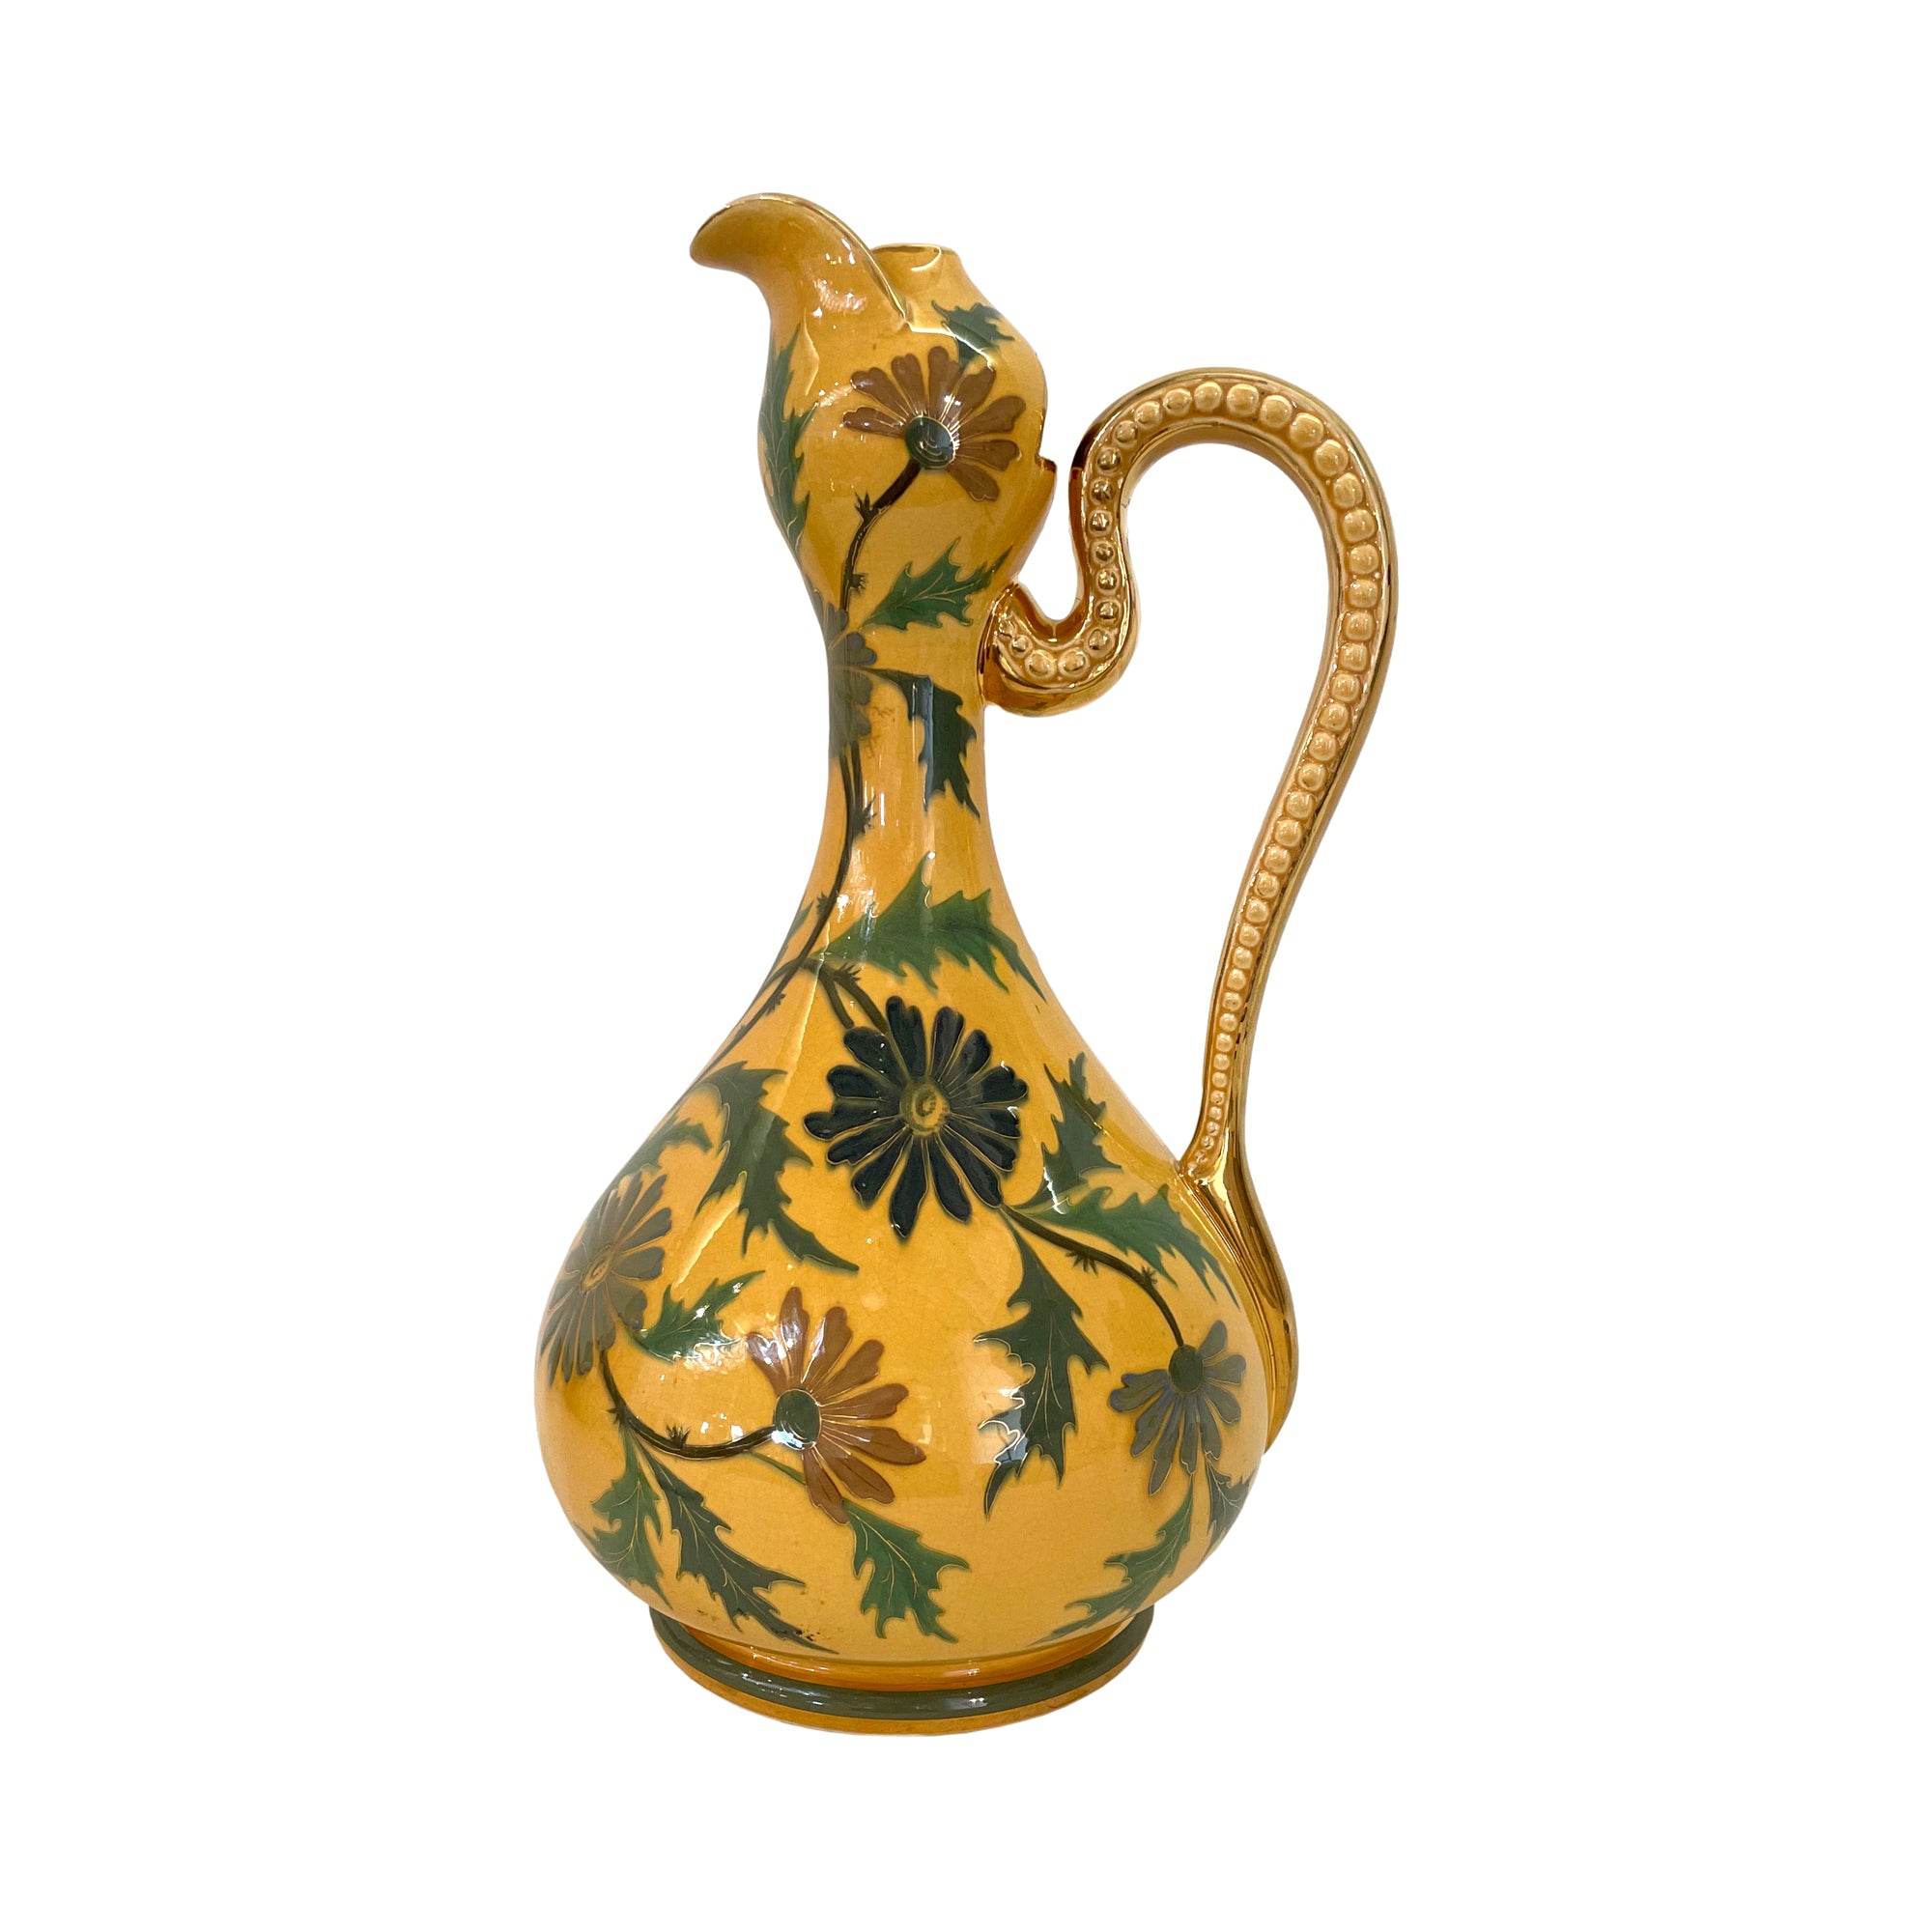 Victorian Aesthetic Movement Floral Ceramic Ewer or Pitcher